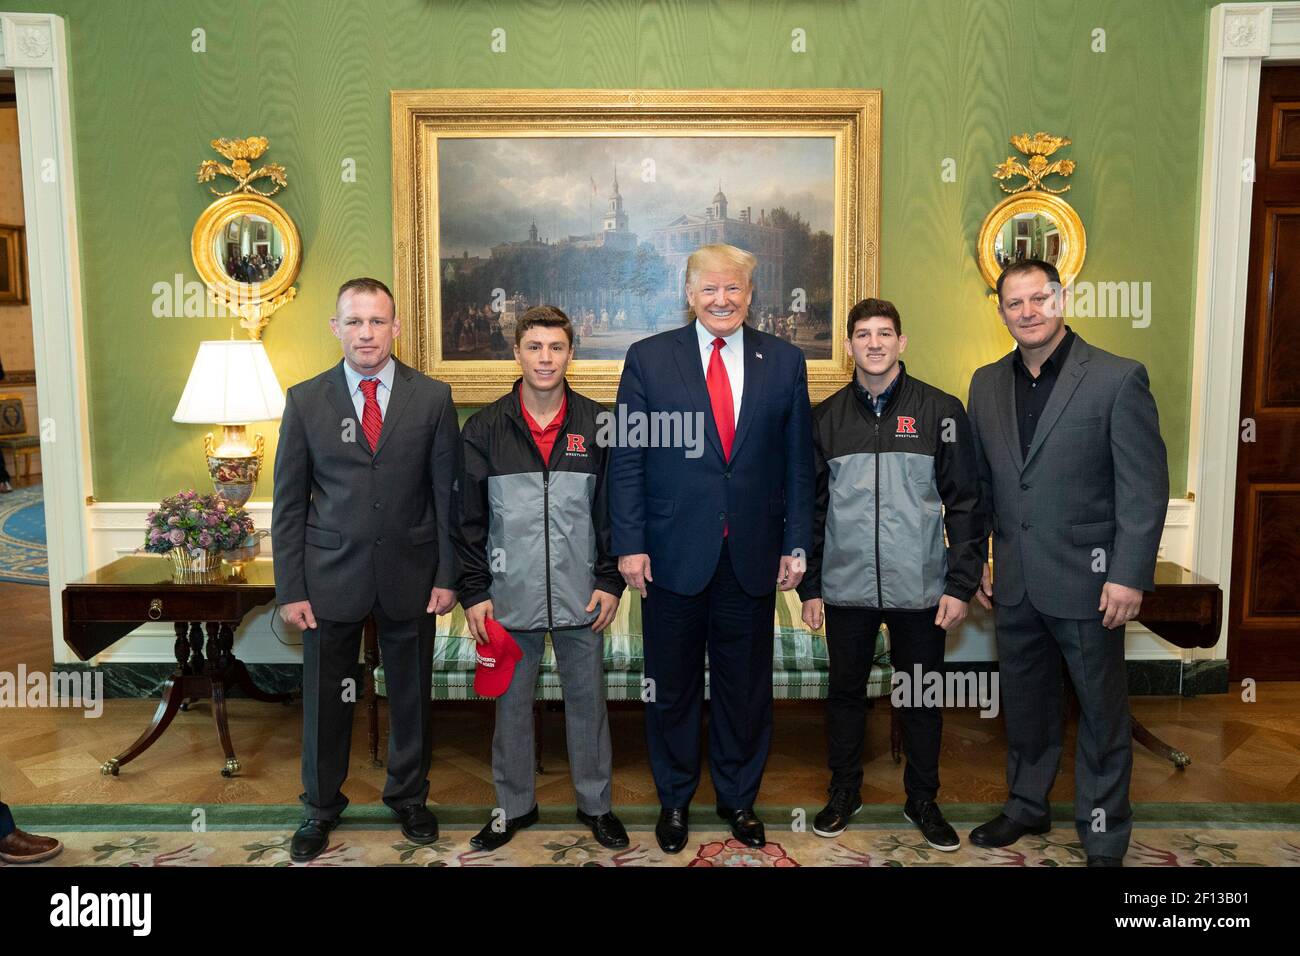 President Donald Trump poses with members of the 2019 NCAA Rutgers University Men's Champion Wrestling team Friday Nov. 22 2019 during the NCAA Collegiate National Champions Day in the Green Room of the White House. Stock Photo